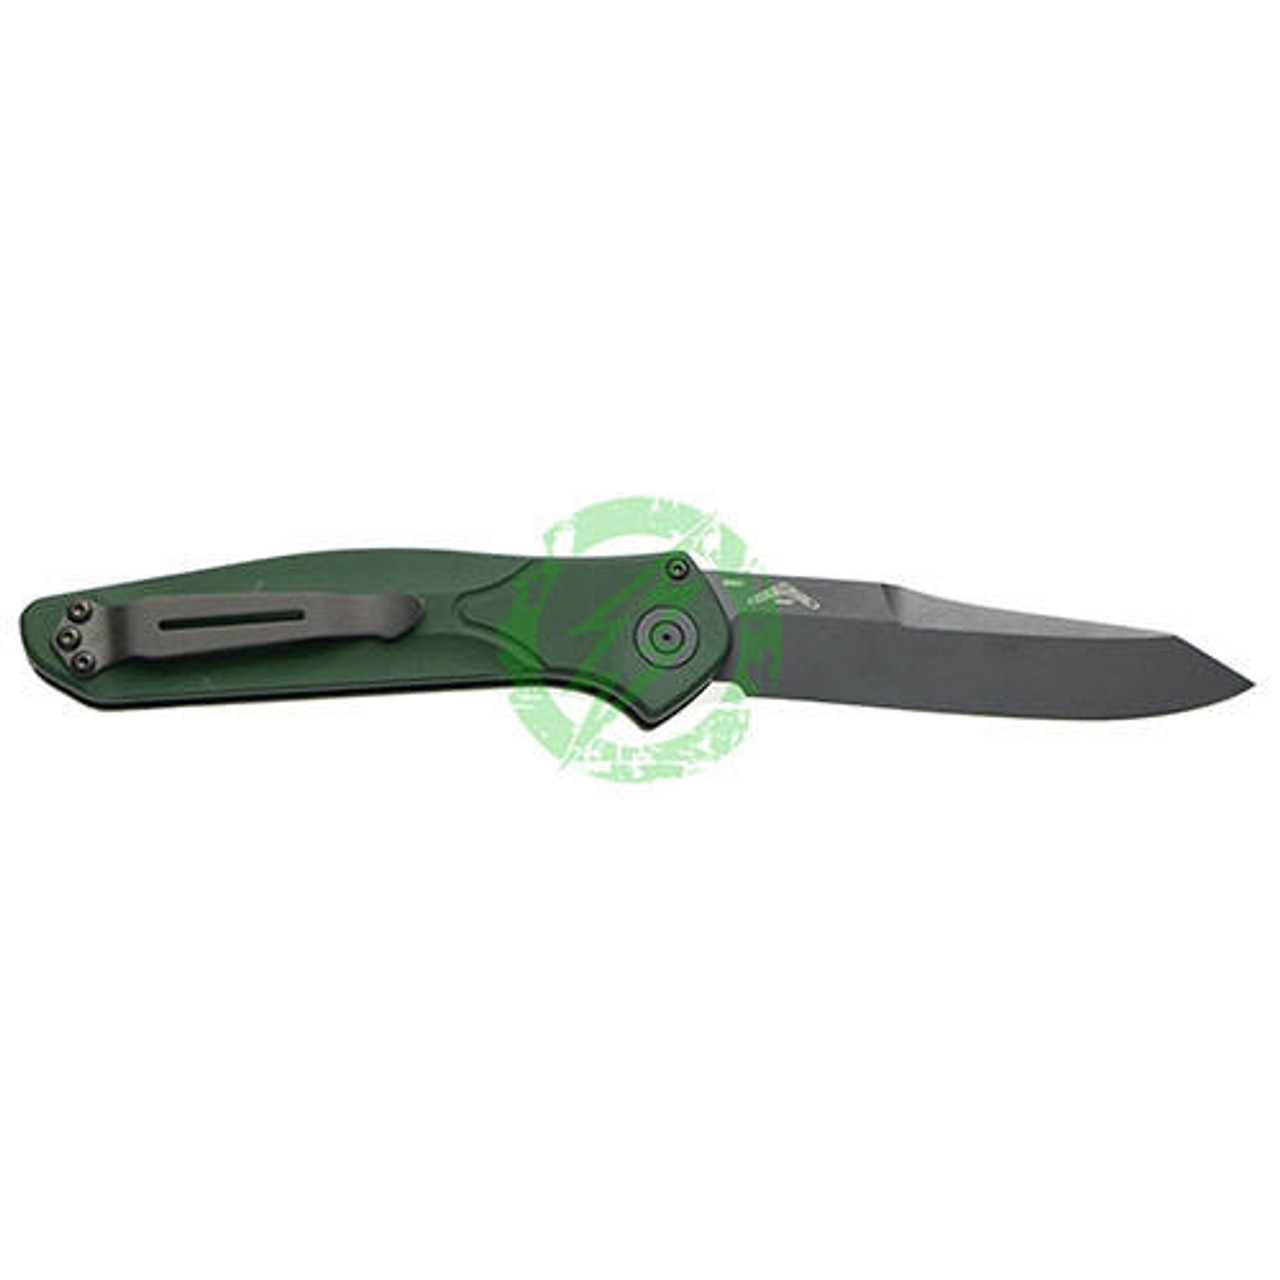  Benchmade Auto Osborne Reverse Tanto Green Anodized, 6061-T6 Billet Aluminum with Stainless Steel Liners Handle 